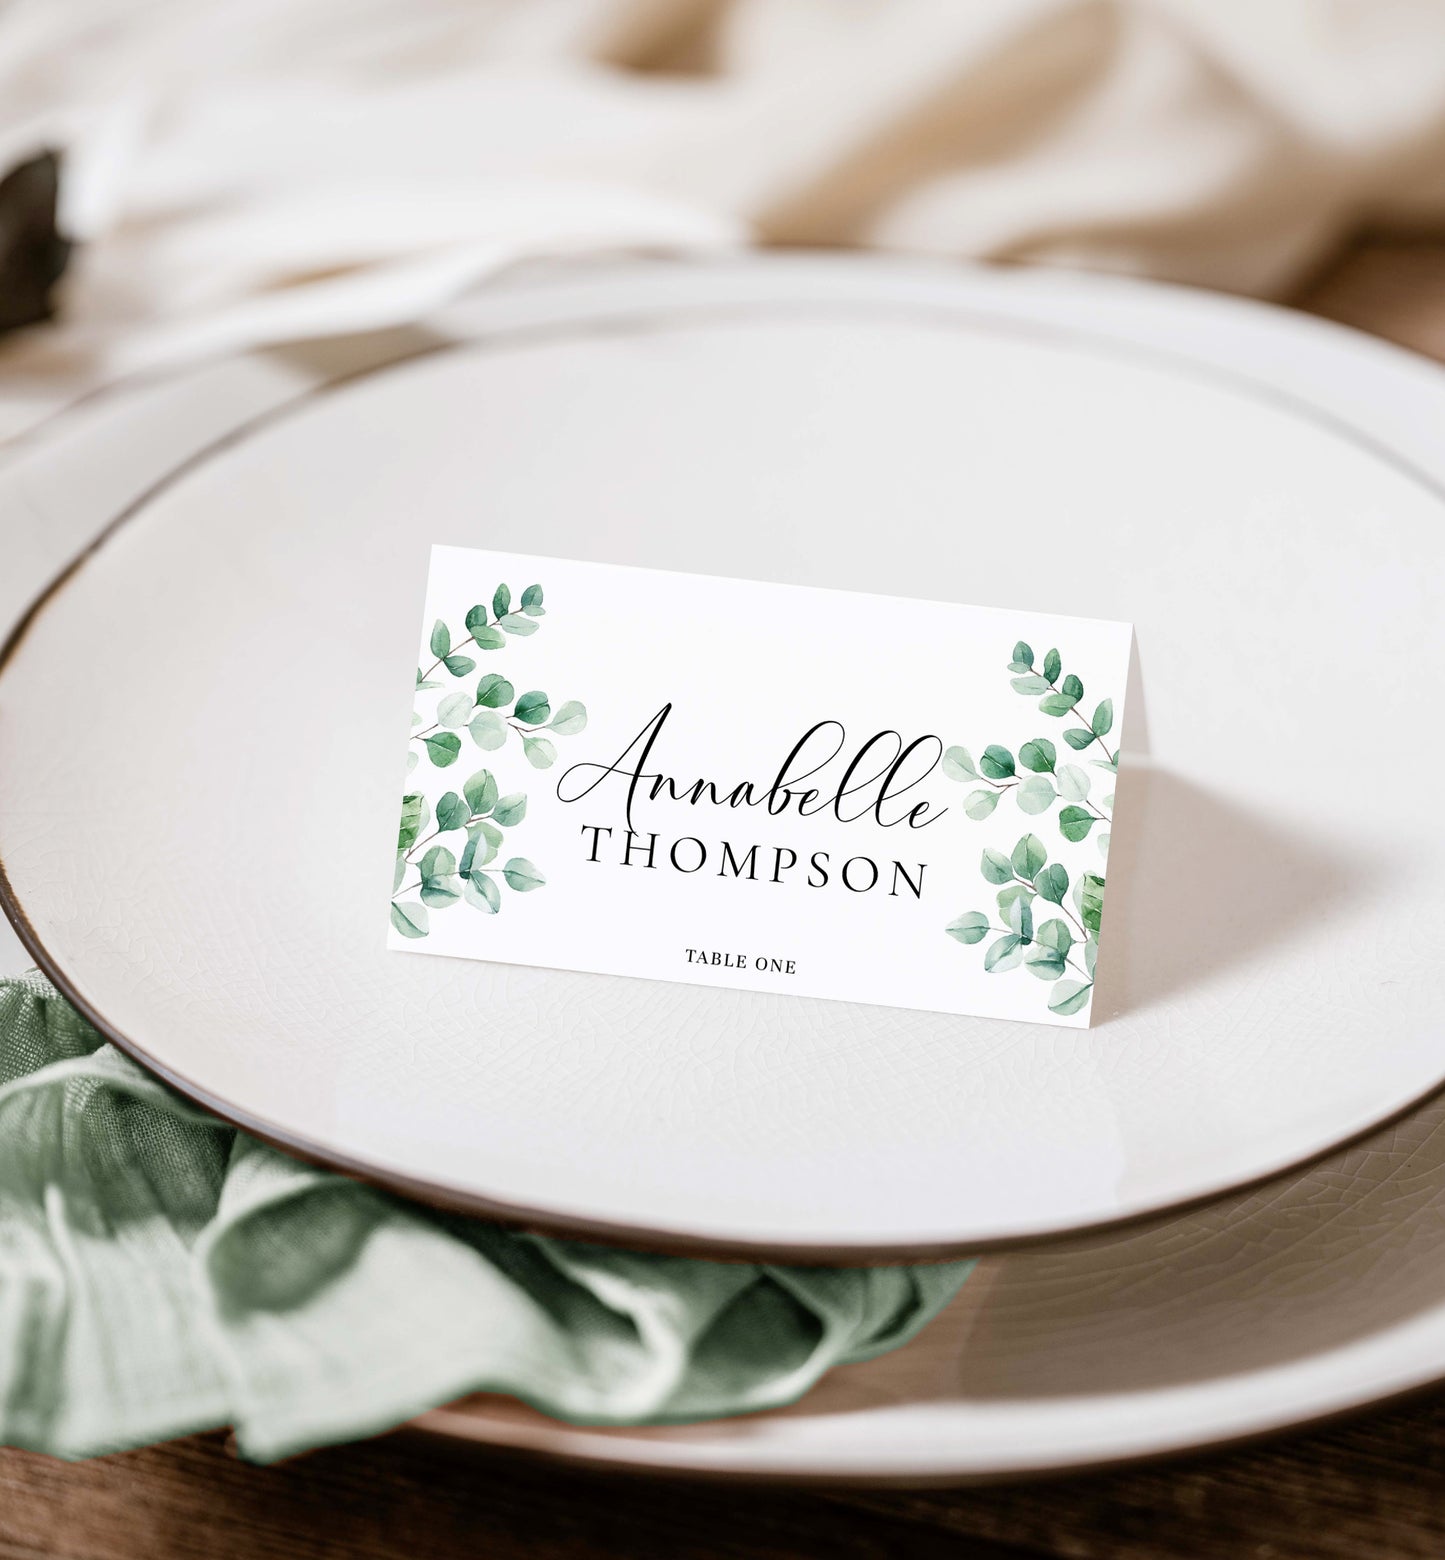 Ferras Greenery | Printable Place Cards Template